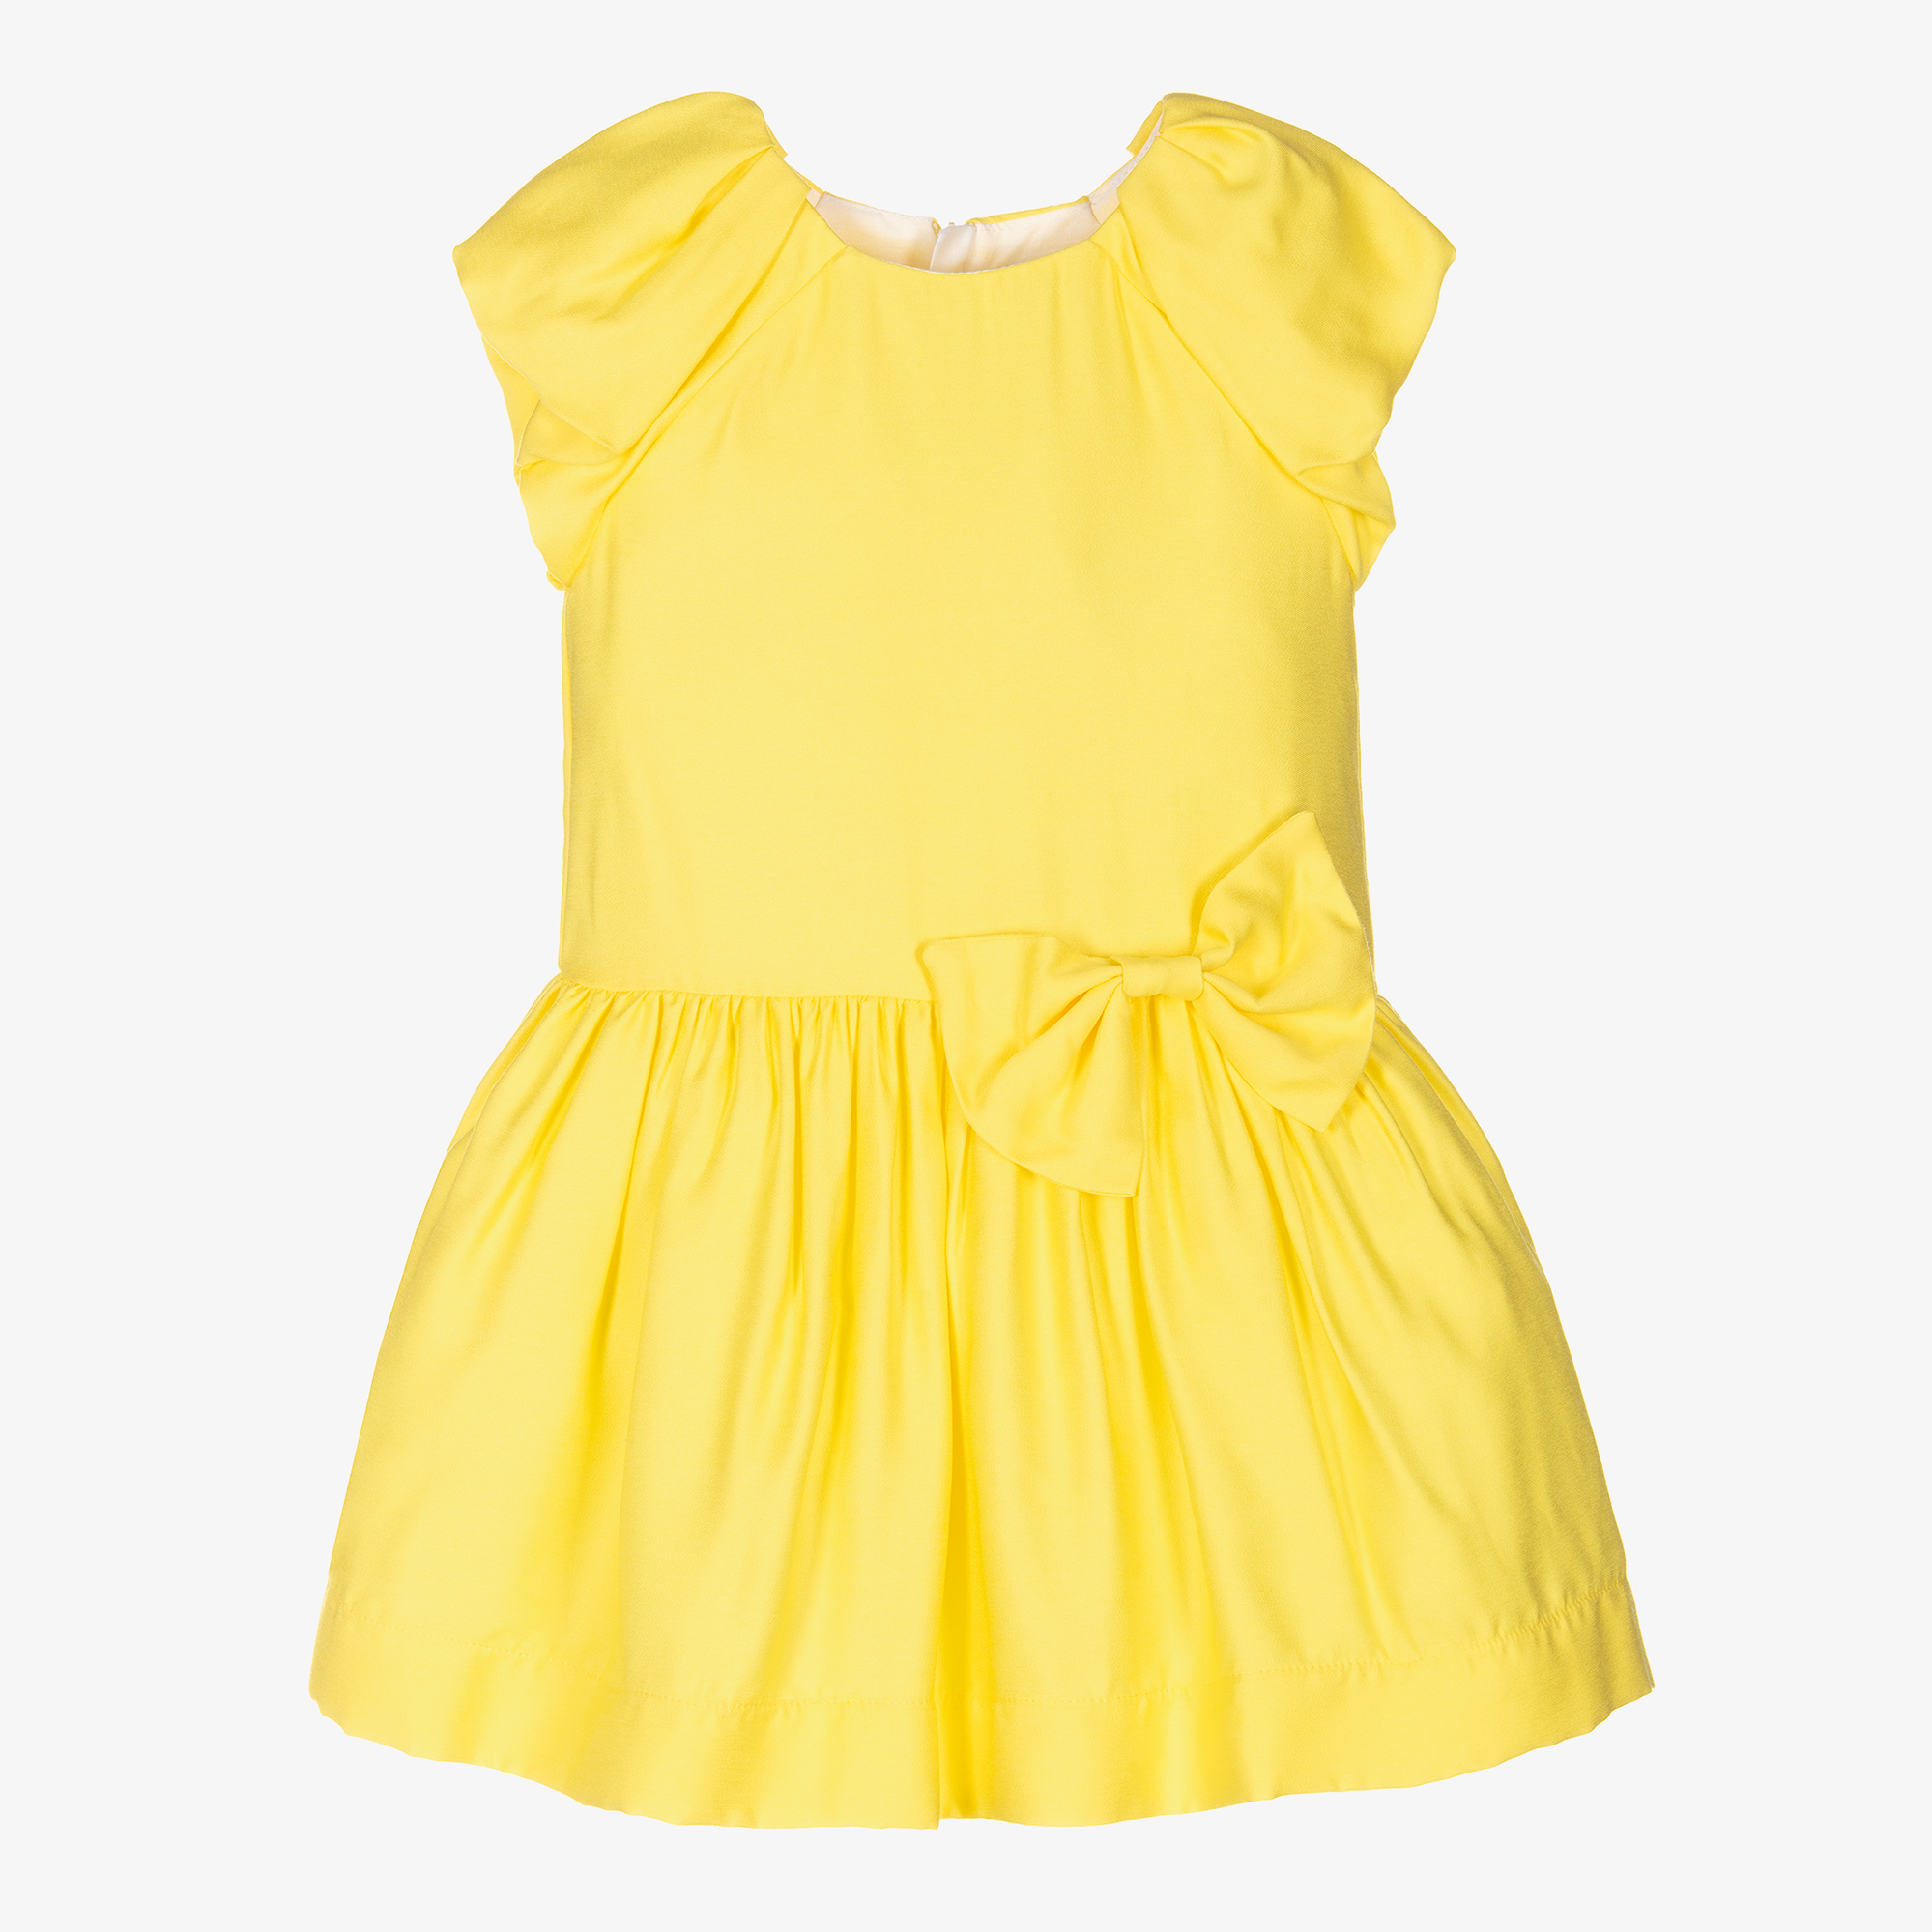 Mayoral mayoral girls yellow dress age 7 worn once 